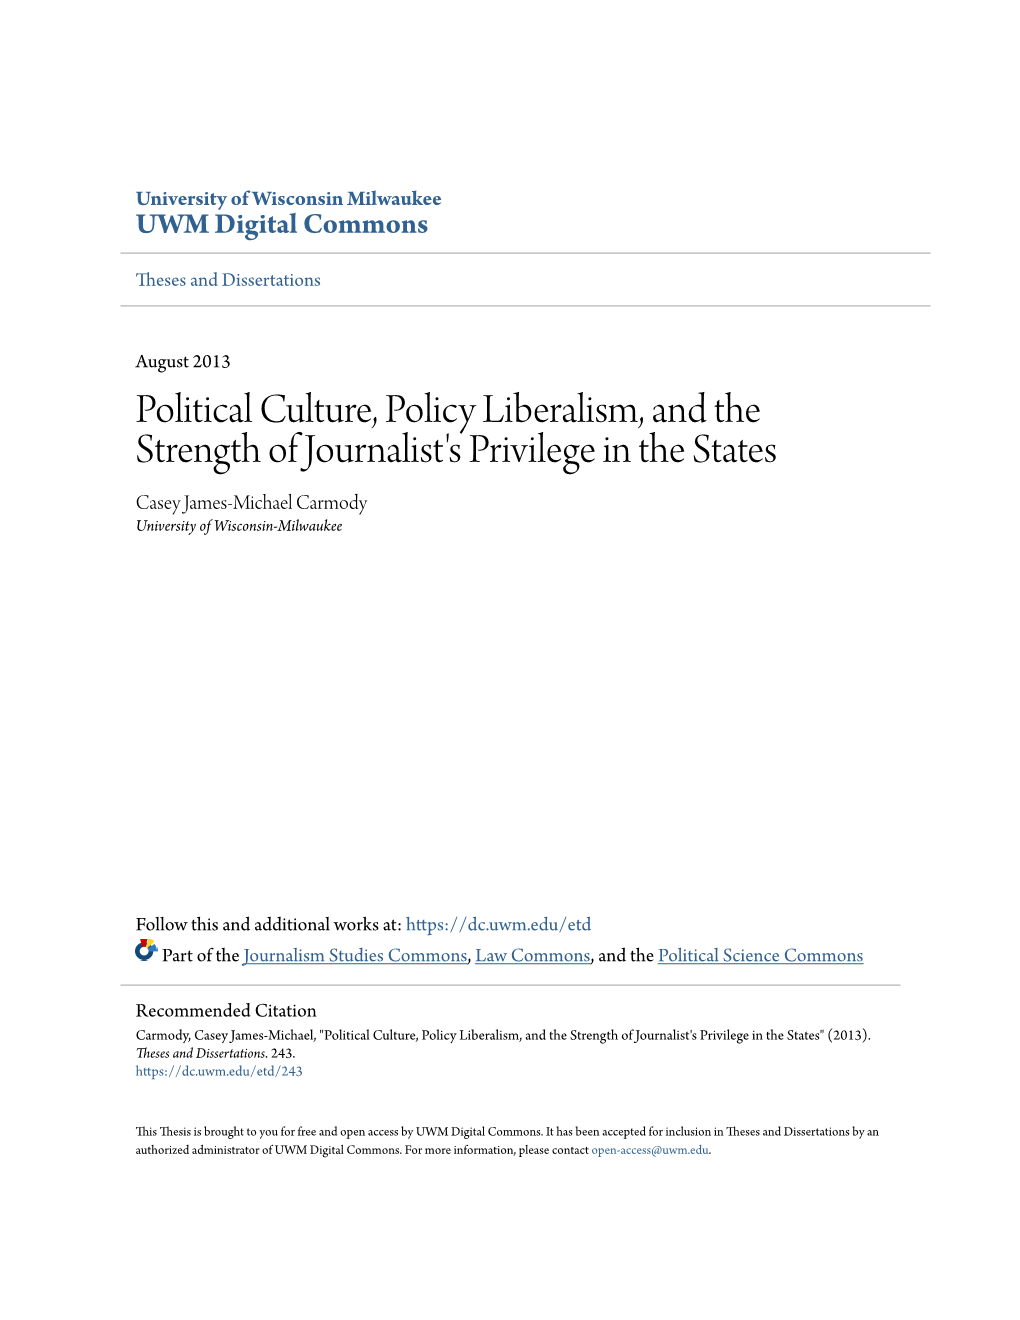 Political Culture, Policy Liberalism, and the Strength of Journalist's Privilege in the States Casey James-Michael Carmody University of Wisconsin-Milwaukee